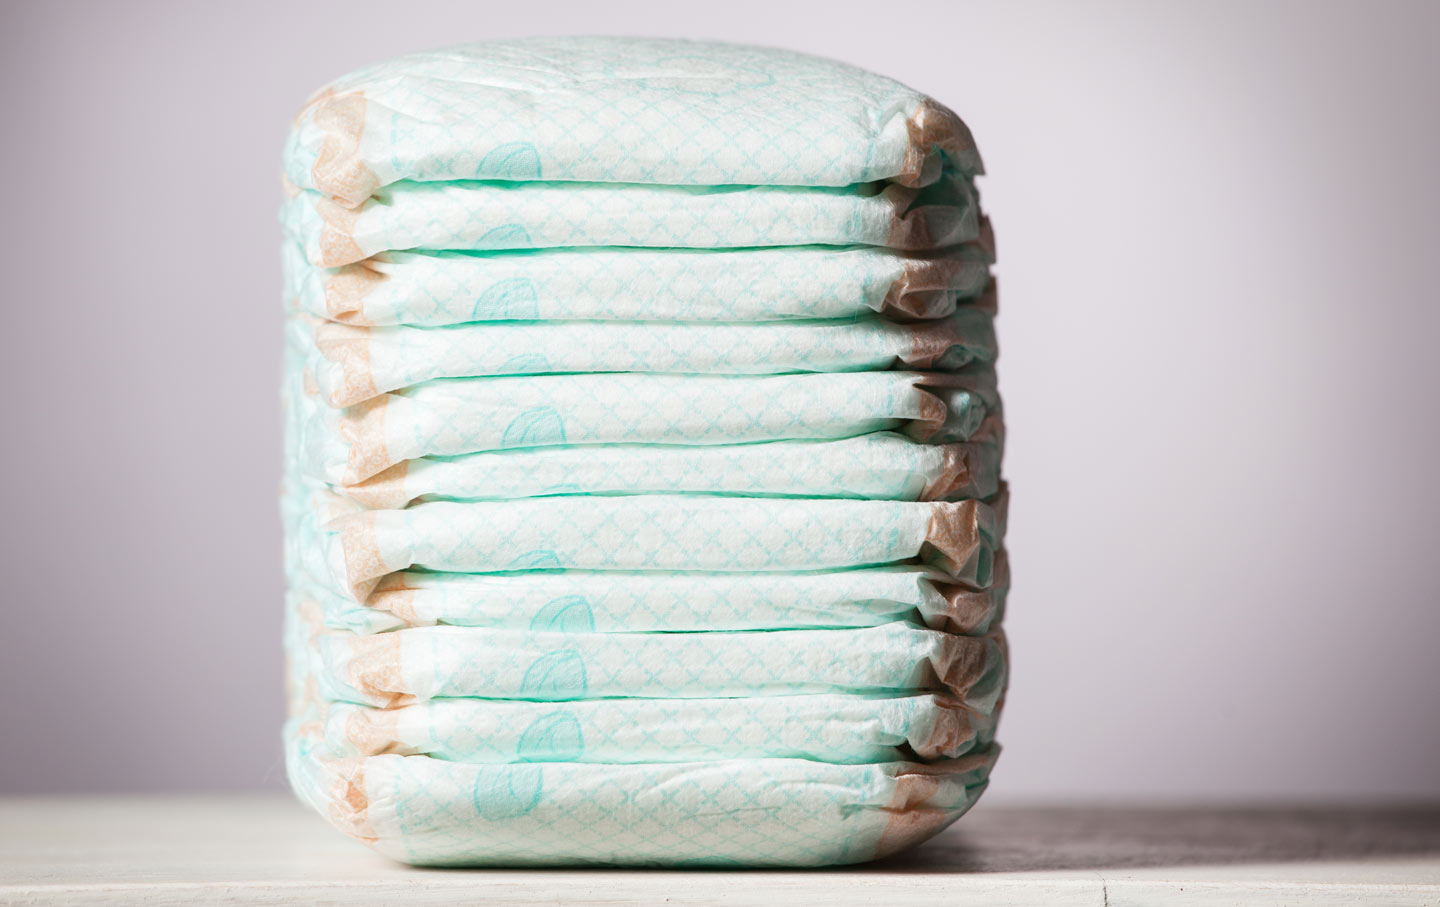 Stranger leaves stack of diapers and note in HomeGoods 